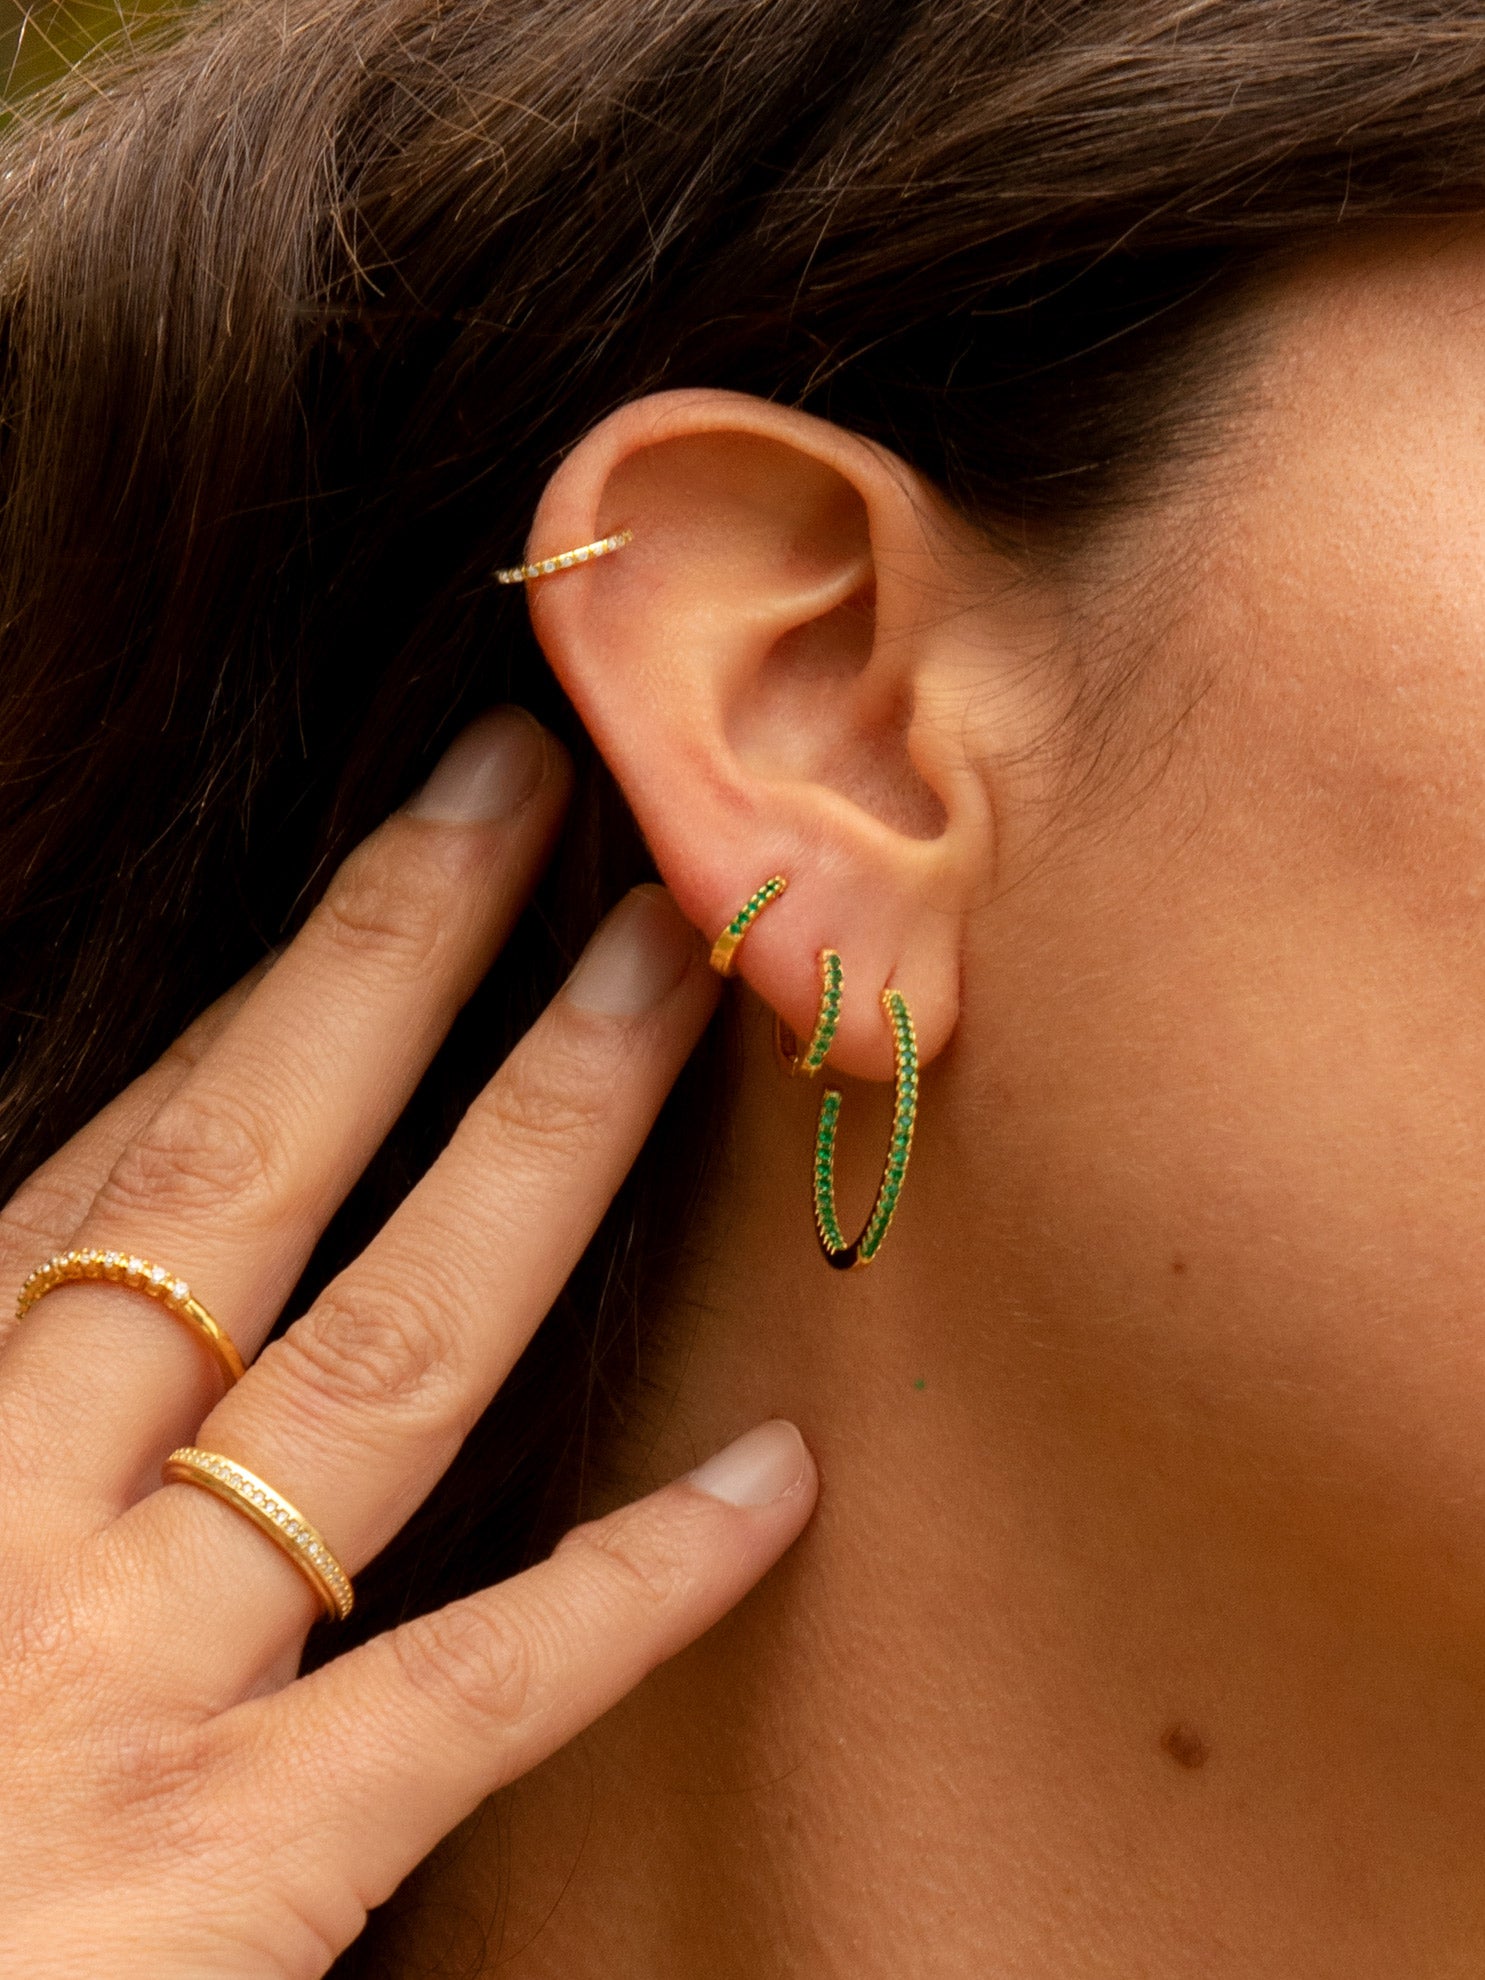 Gold Thin Ear Cuffs With Stones - Pair